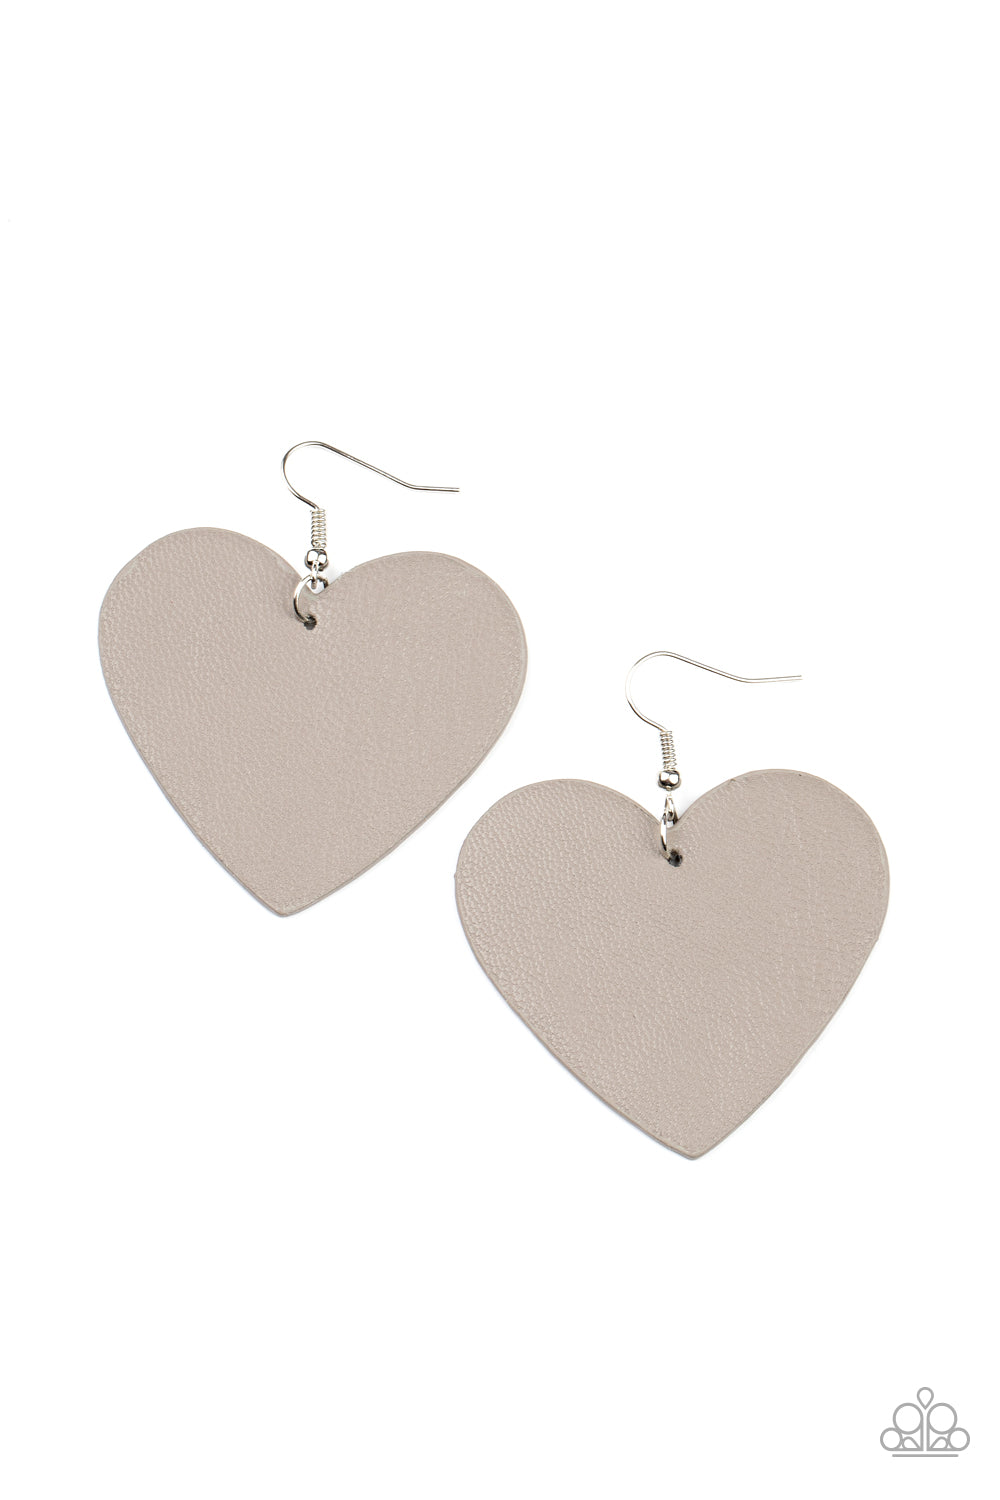 Country Crush - Silver Leather Heart Earrings - Paparazzi Accessories 